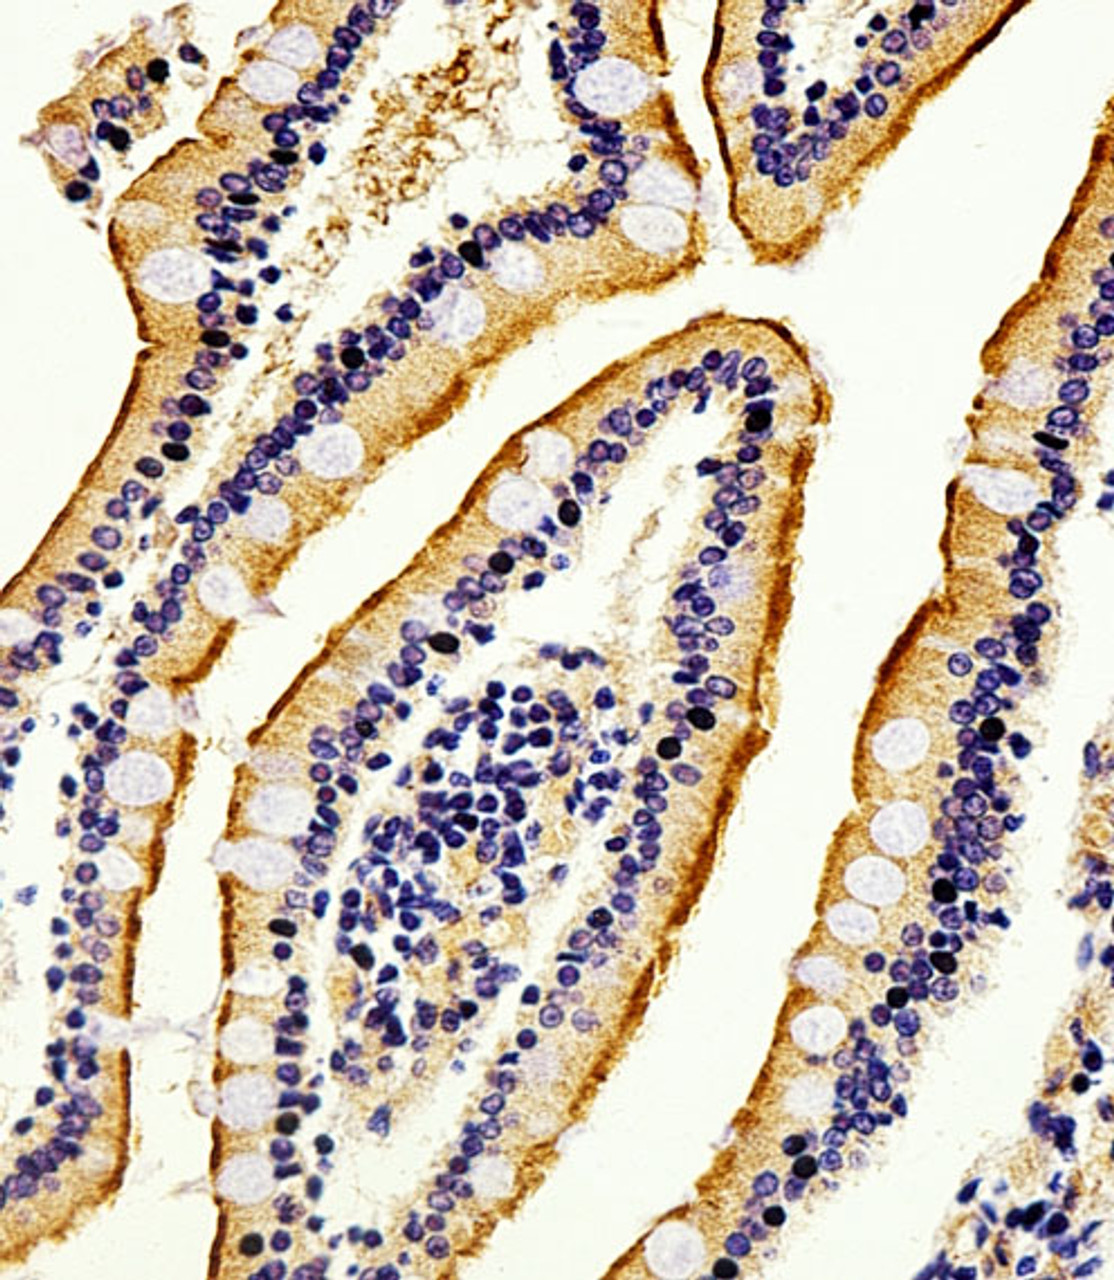 Immunohistochemical analysis of paraffin-embedded H. small intestine section using Alkaline Phosphatase (ALPI) Antibody . Antibody was diluted at 1:100 dilution. A peroxidase-conjugated goat anti-rabbit IgG at 1:400 dilution was used as the secondary antibody, followed by DAB staining.